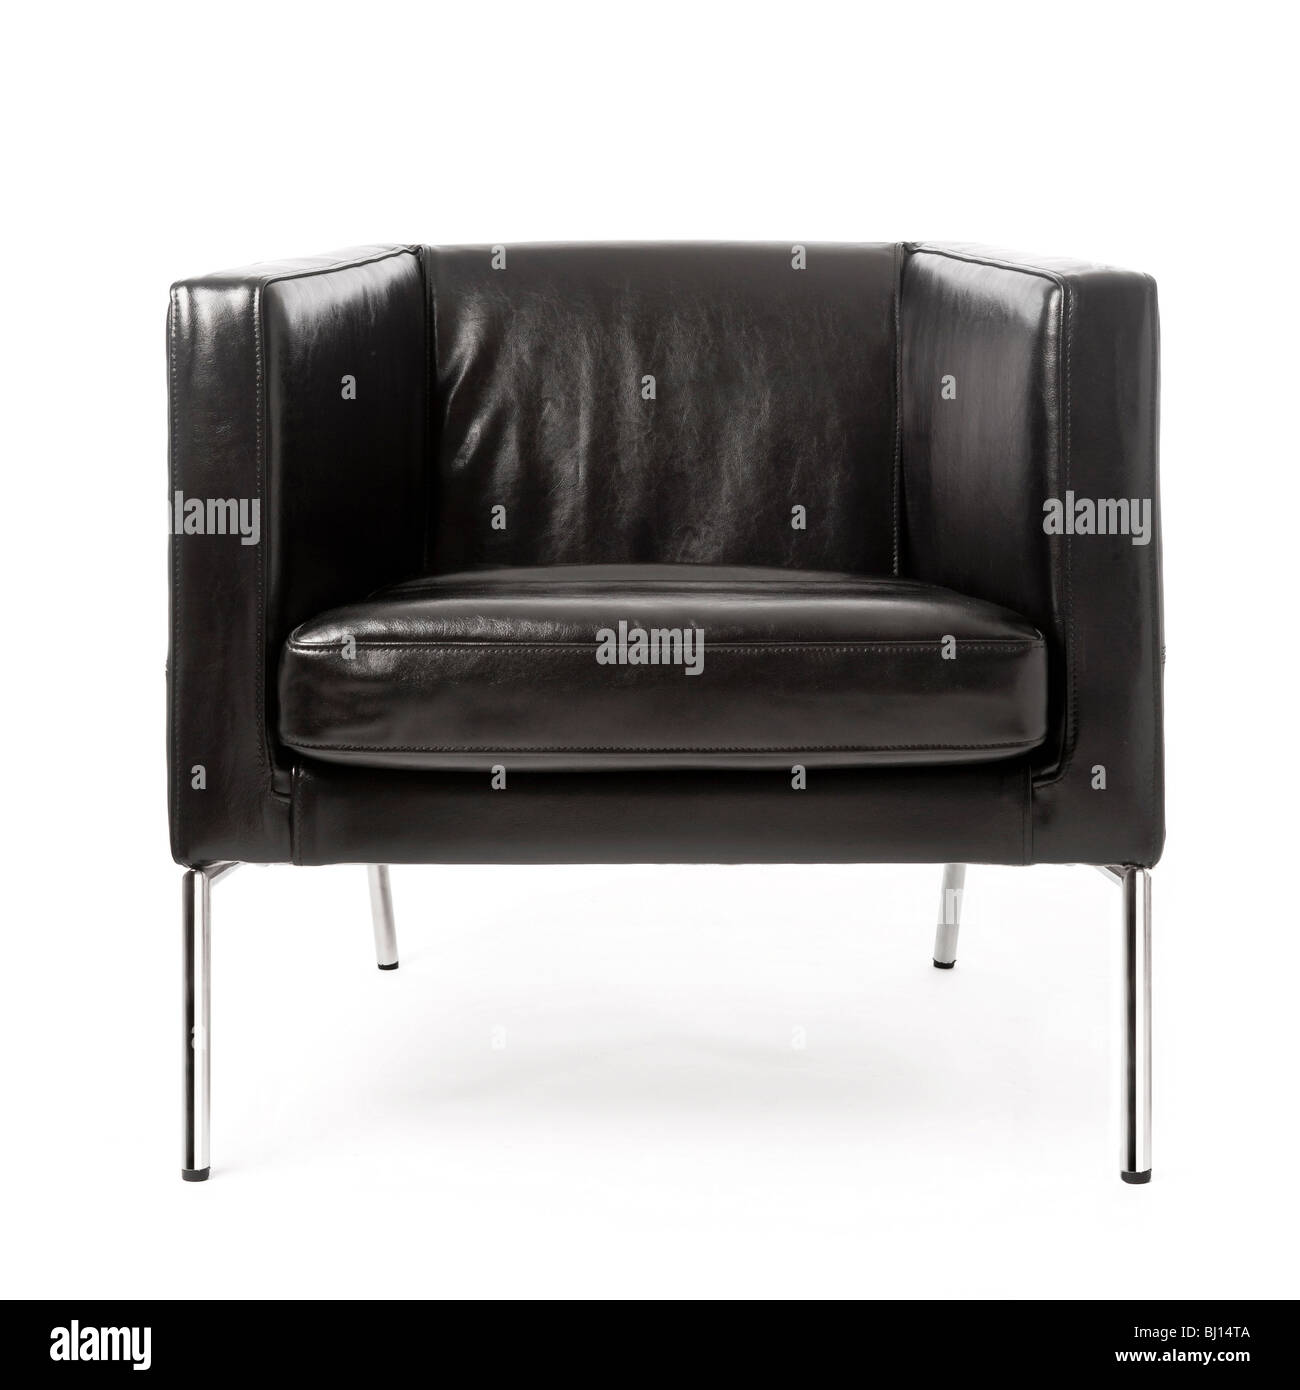 Studio shot of front view of modern black leather and chrome armchair on white background. Stock Photo